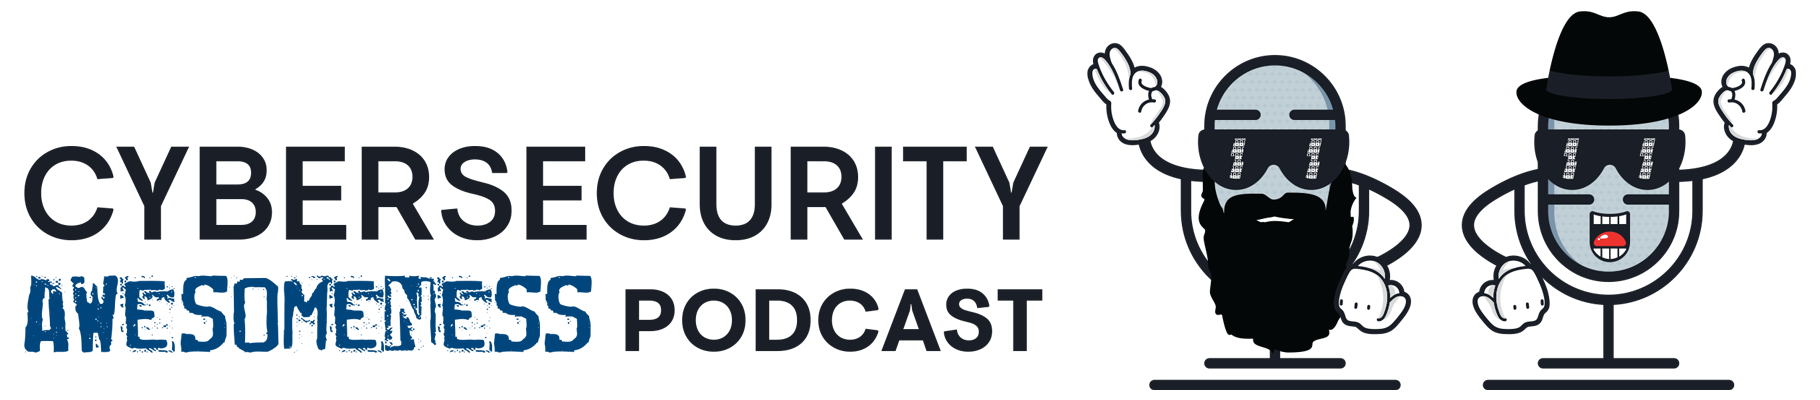 ema-cybersecurity-awesomeness-podcast-header-1